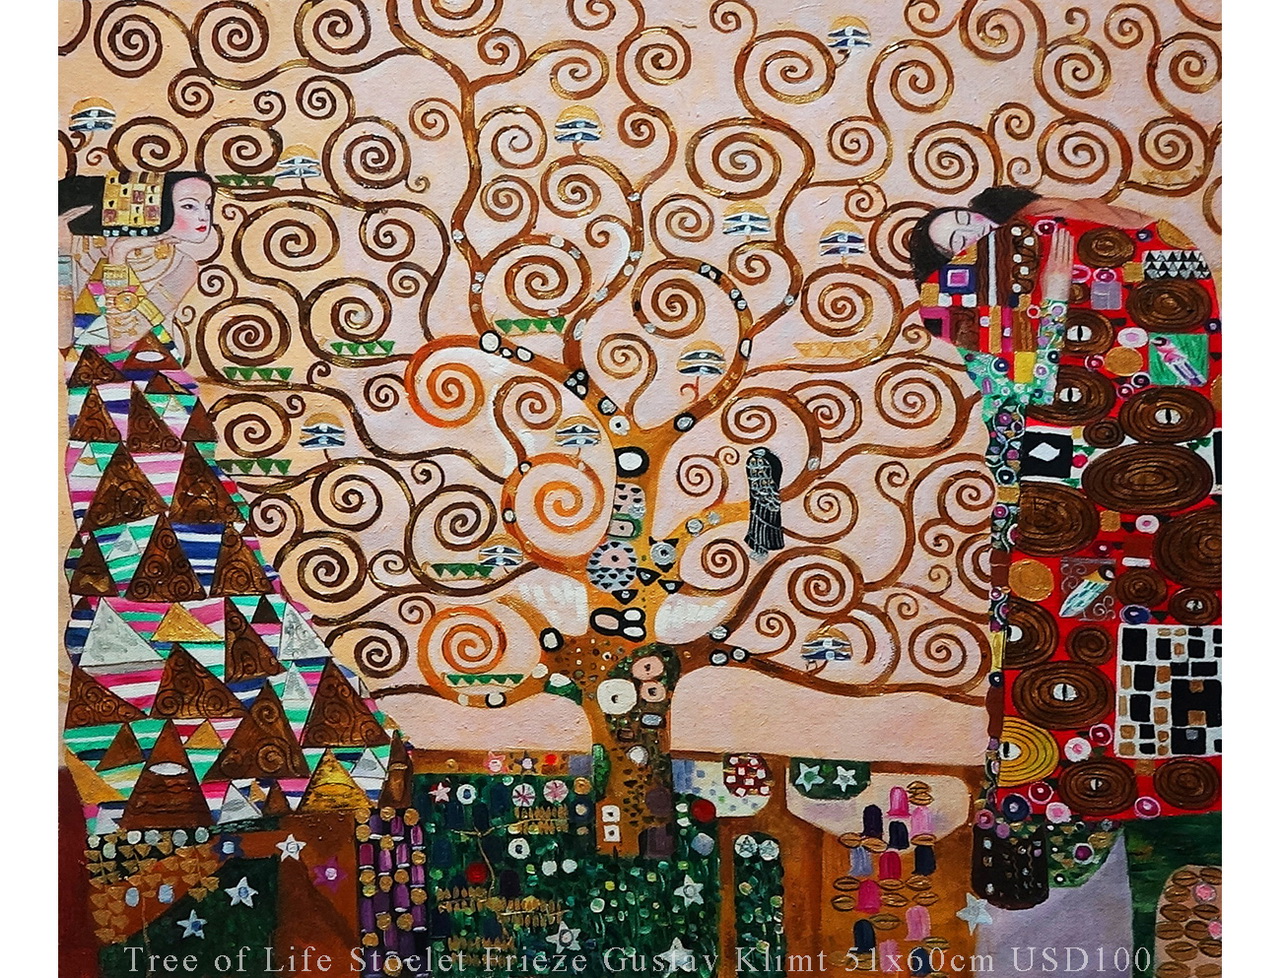 Tree of Life Stoclet Frieze Gustav Klimt 20x24inches USD68 Oil Paintings